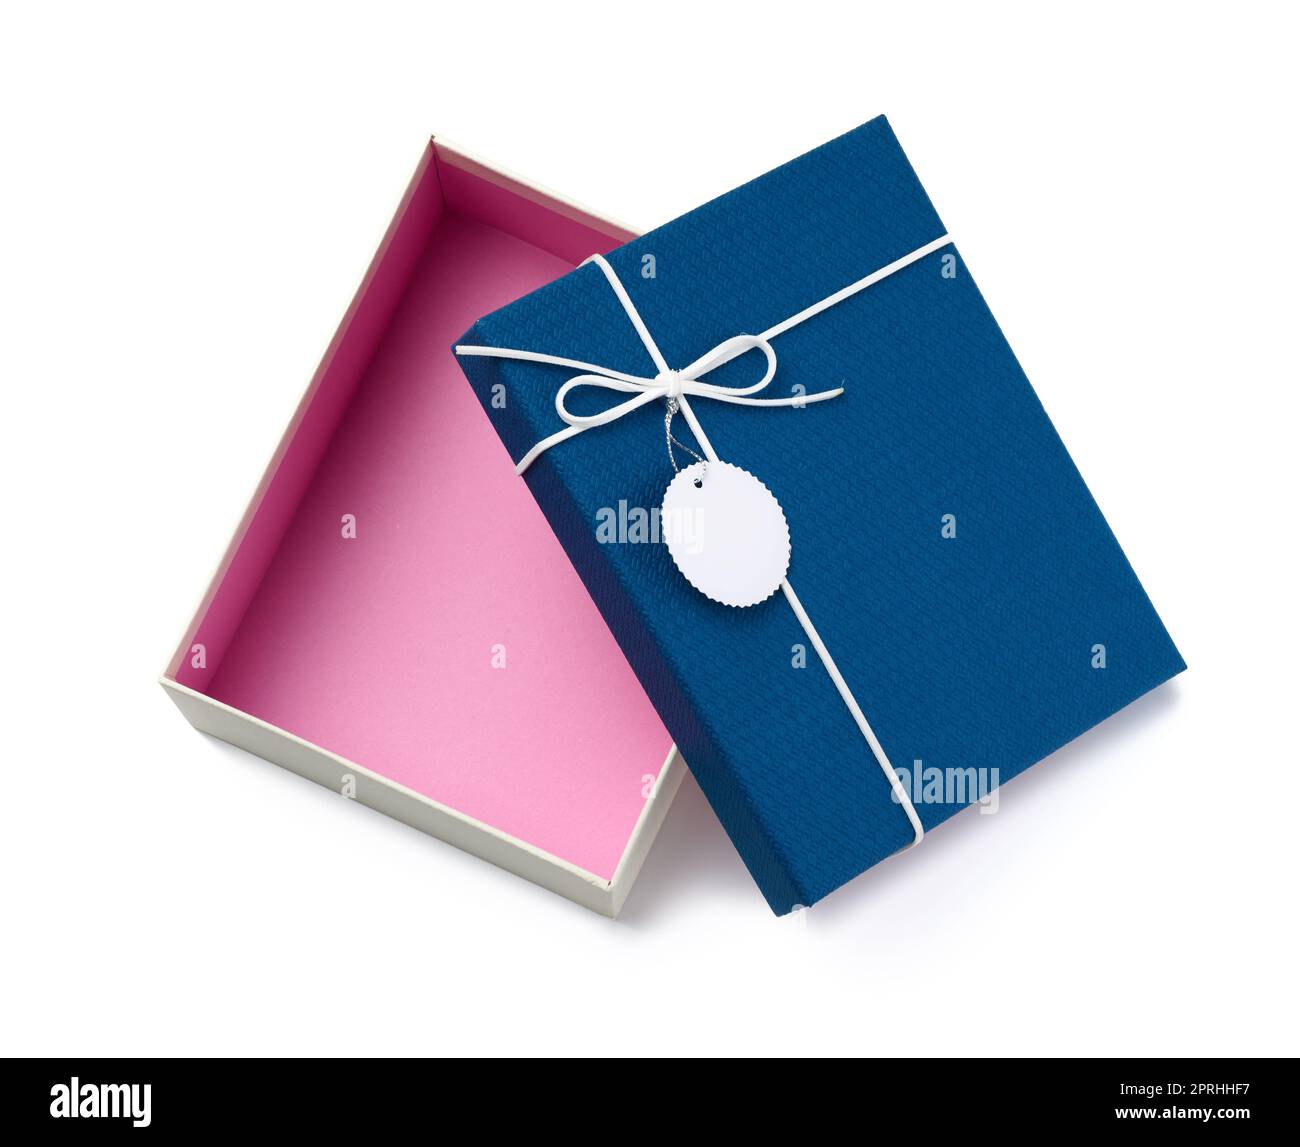 Empty rectangular white cardboard box with blue lid for gift wrapping isolated on white background Stock Photo